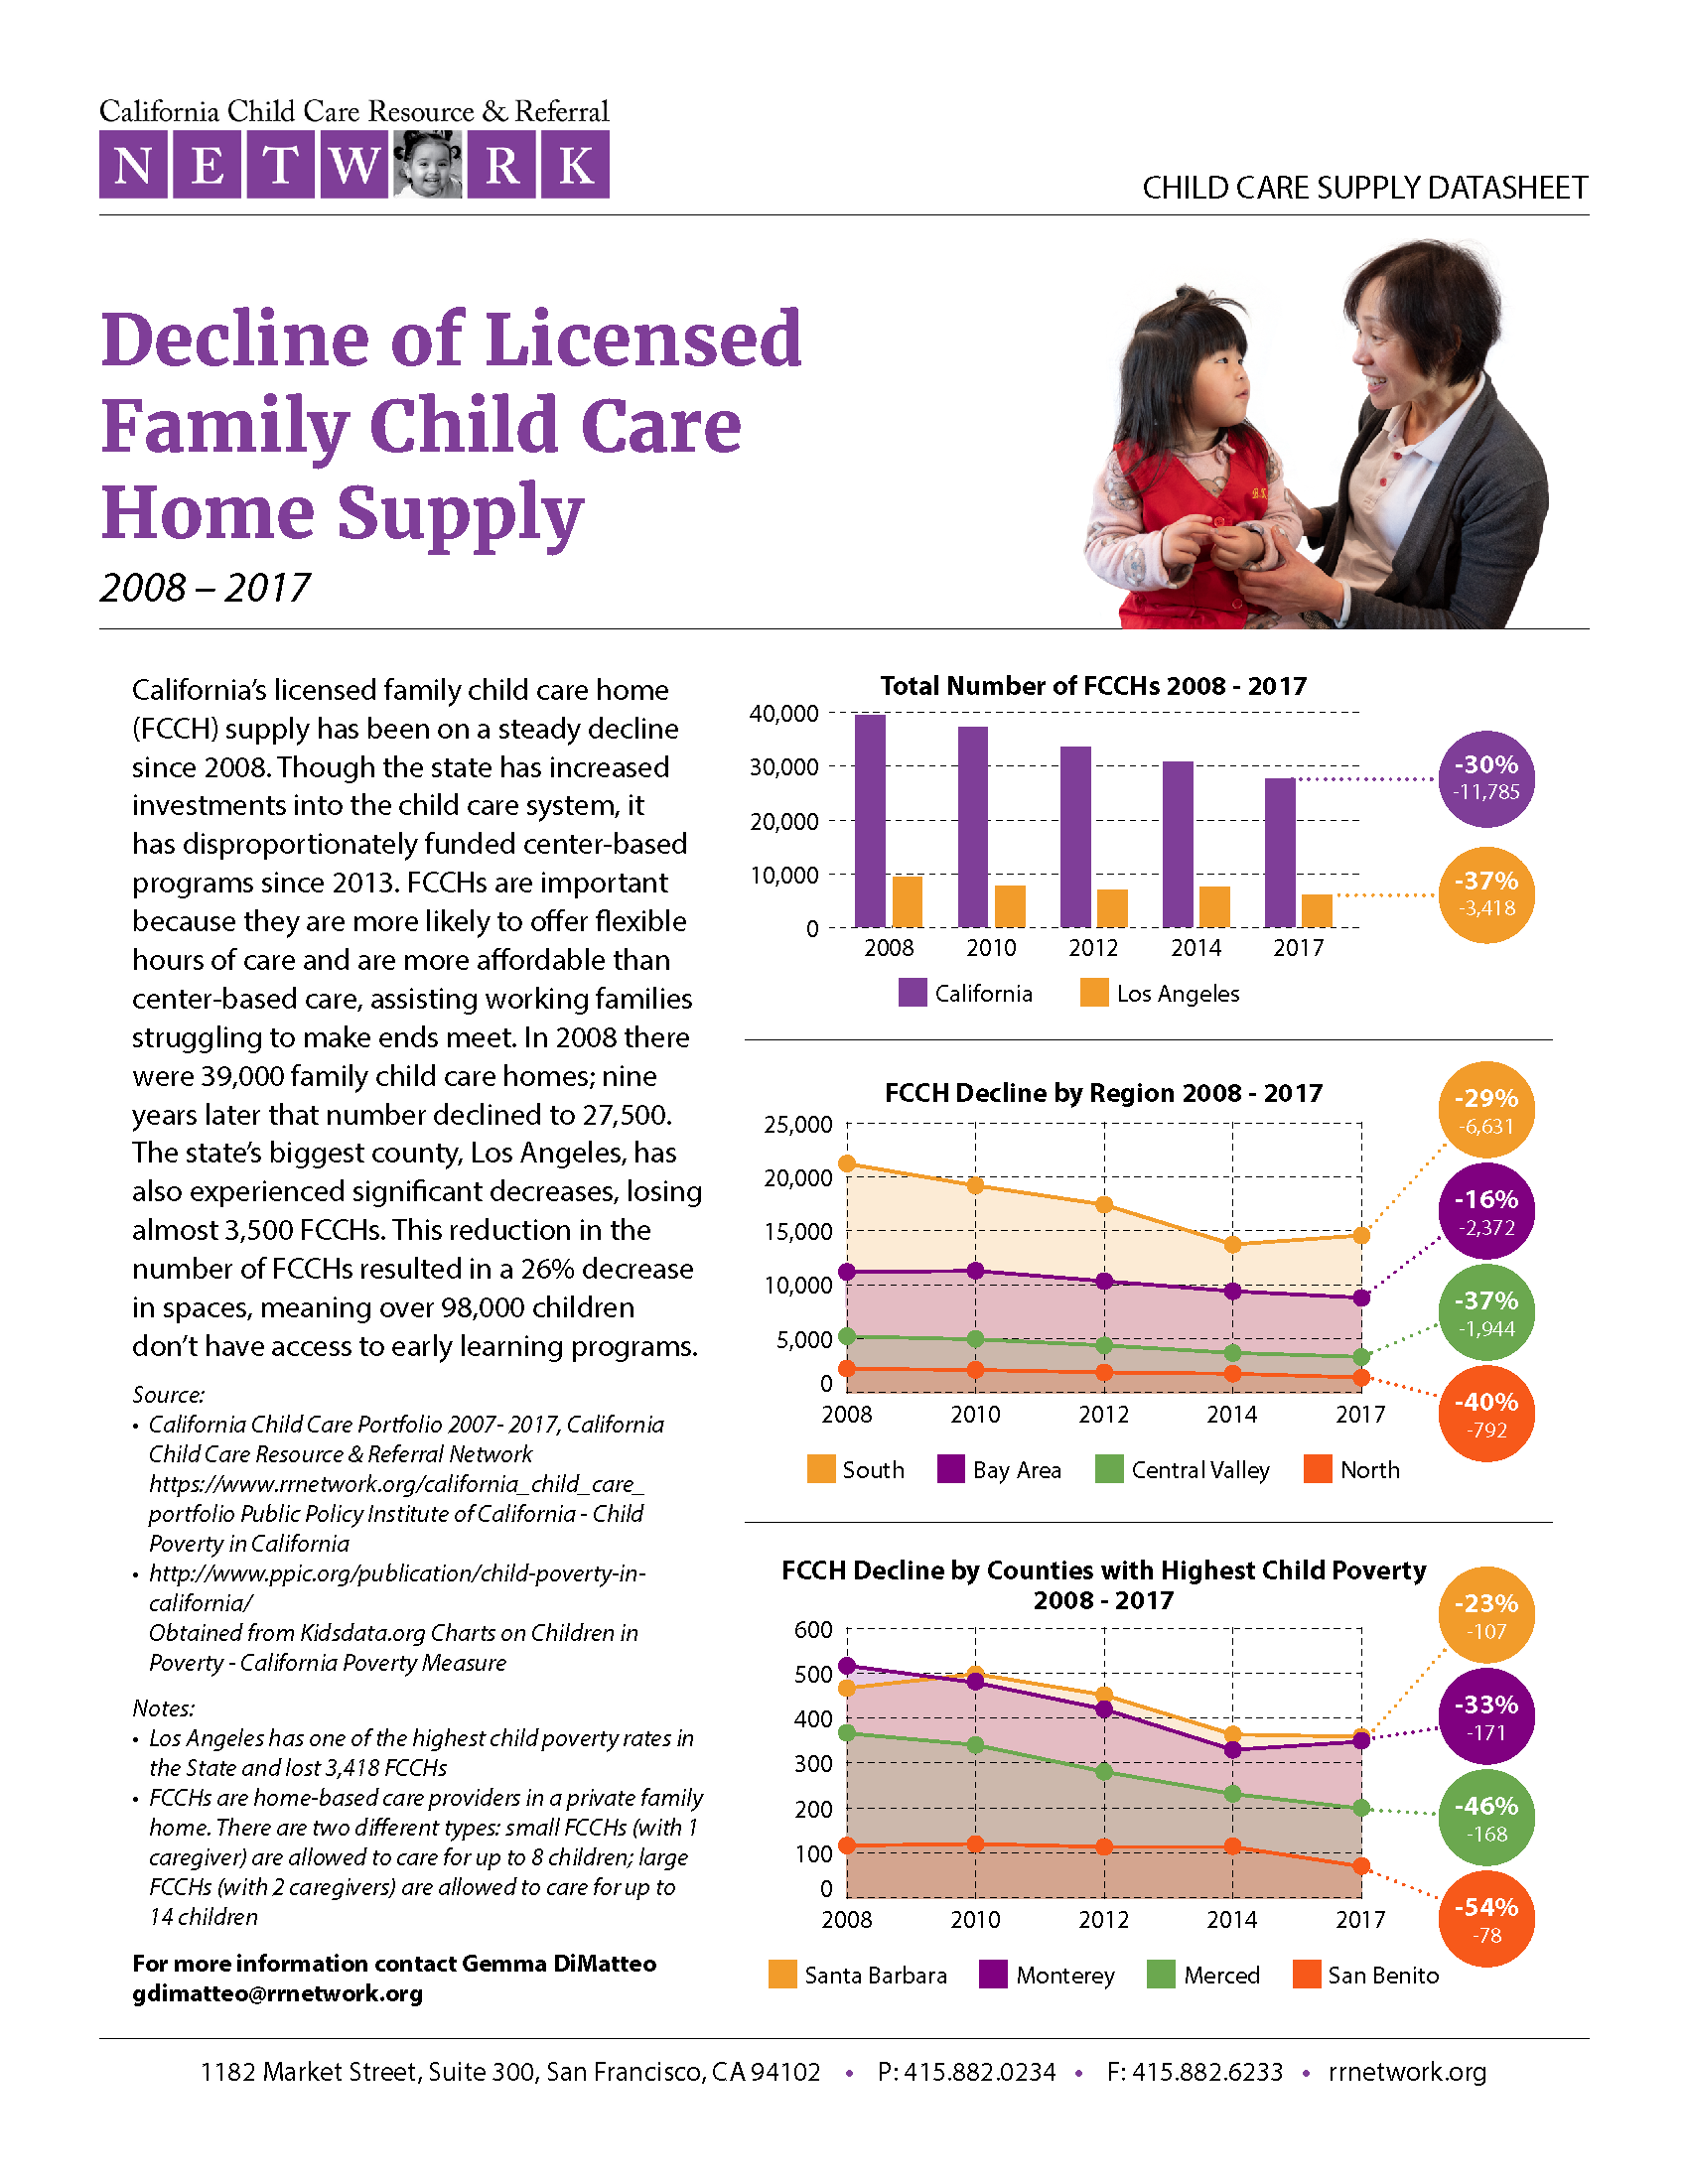 Decline of child care supply 2008-17